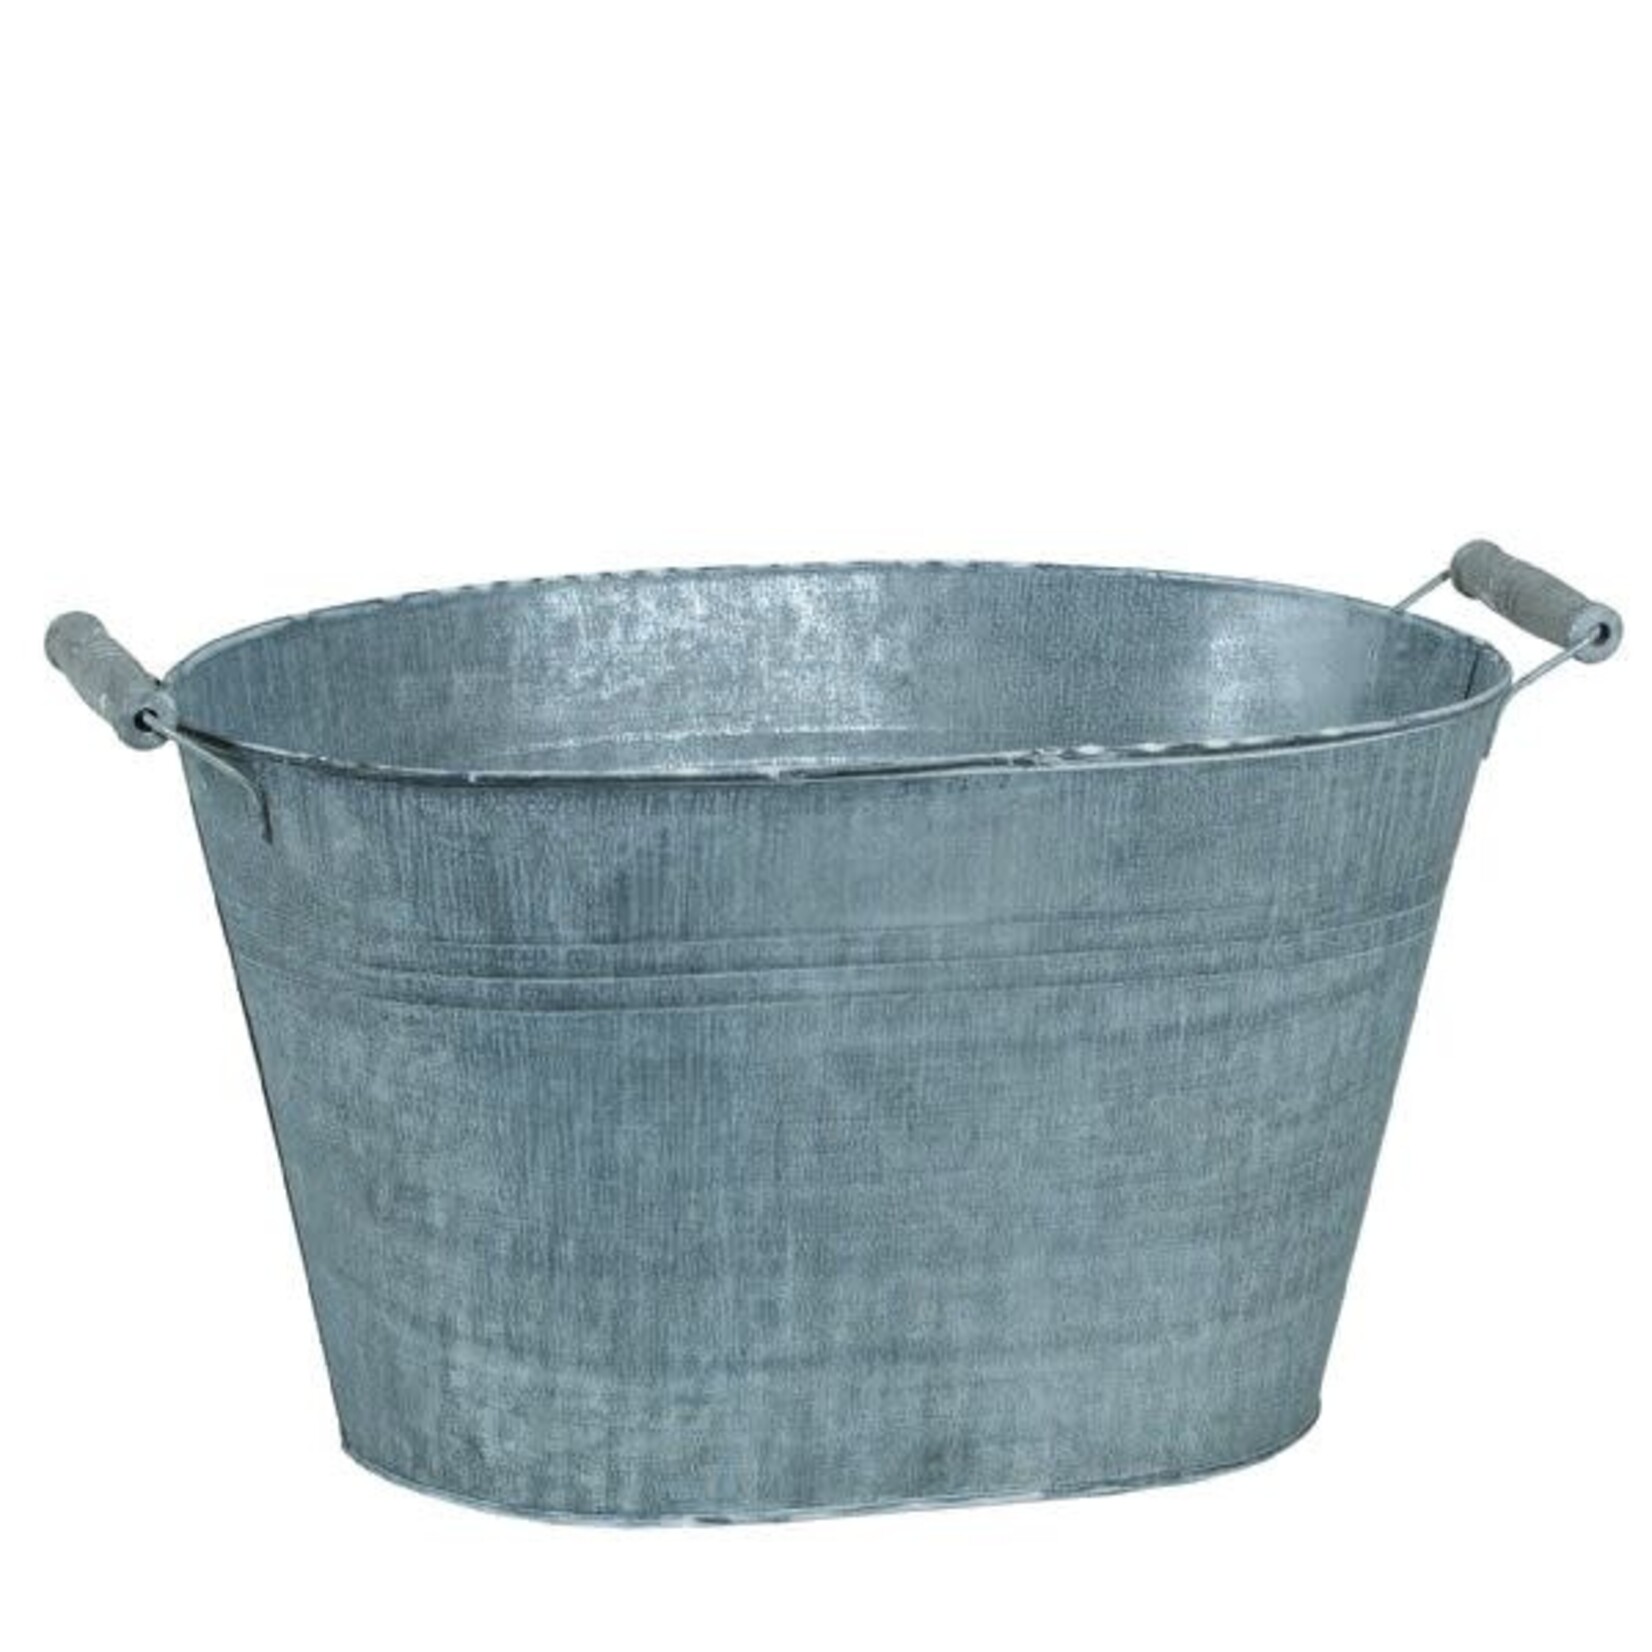 9.25”H X 15.25” X 11” ROUND METAL BASKET WITH HANDLE